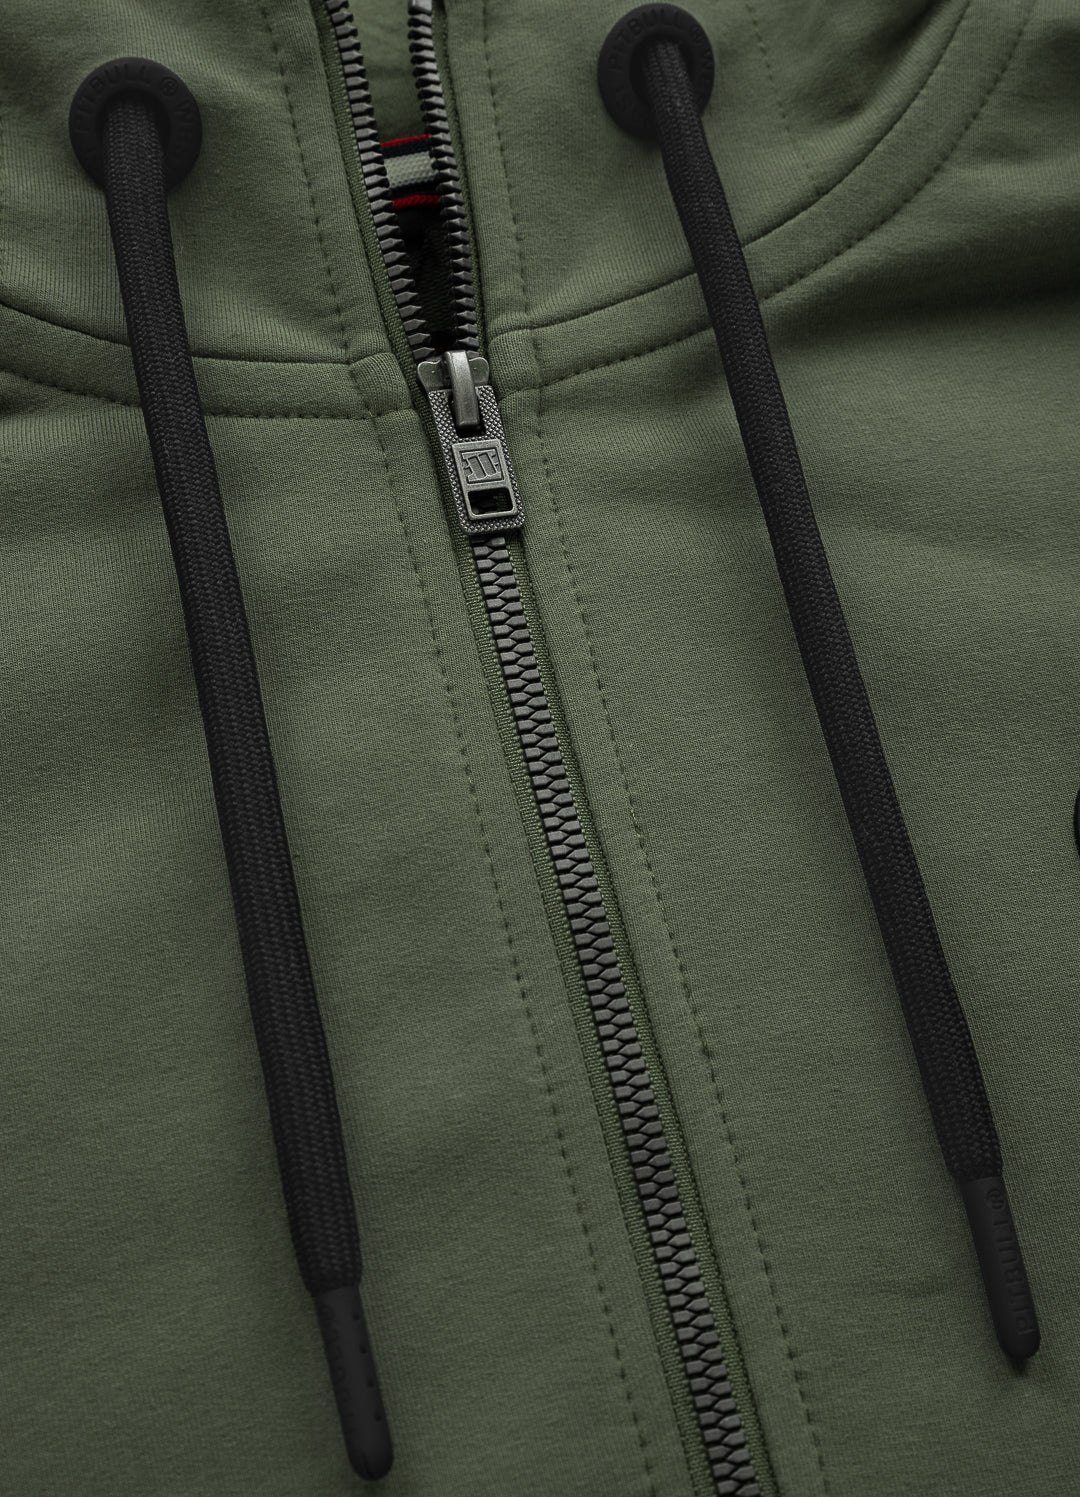 Hooded Zip French Terry RENO Olive - Pitbull West Coast International Store 